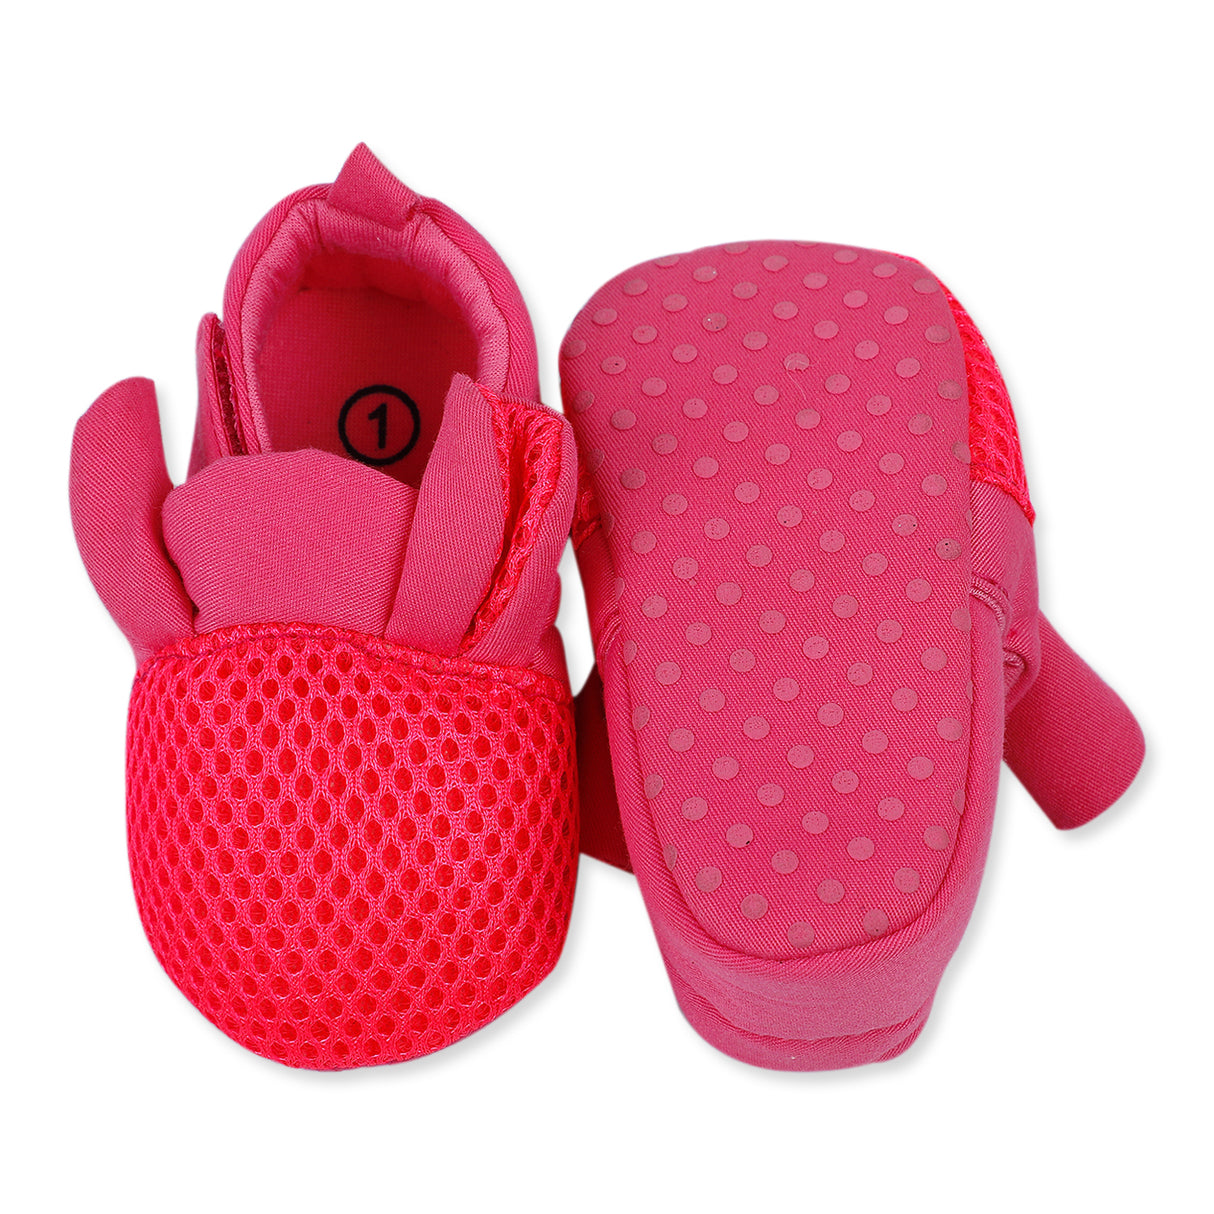 Net Dotted Girls Soft Anti-Skid Booties